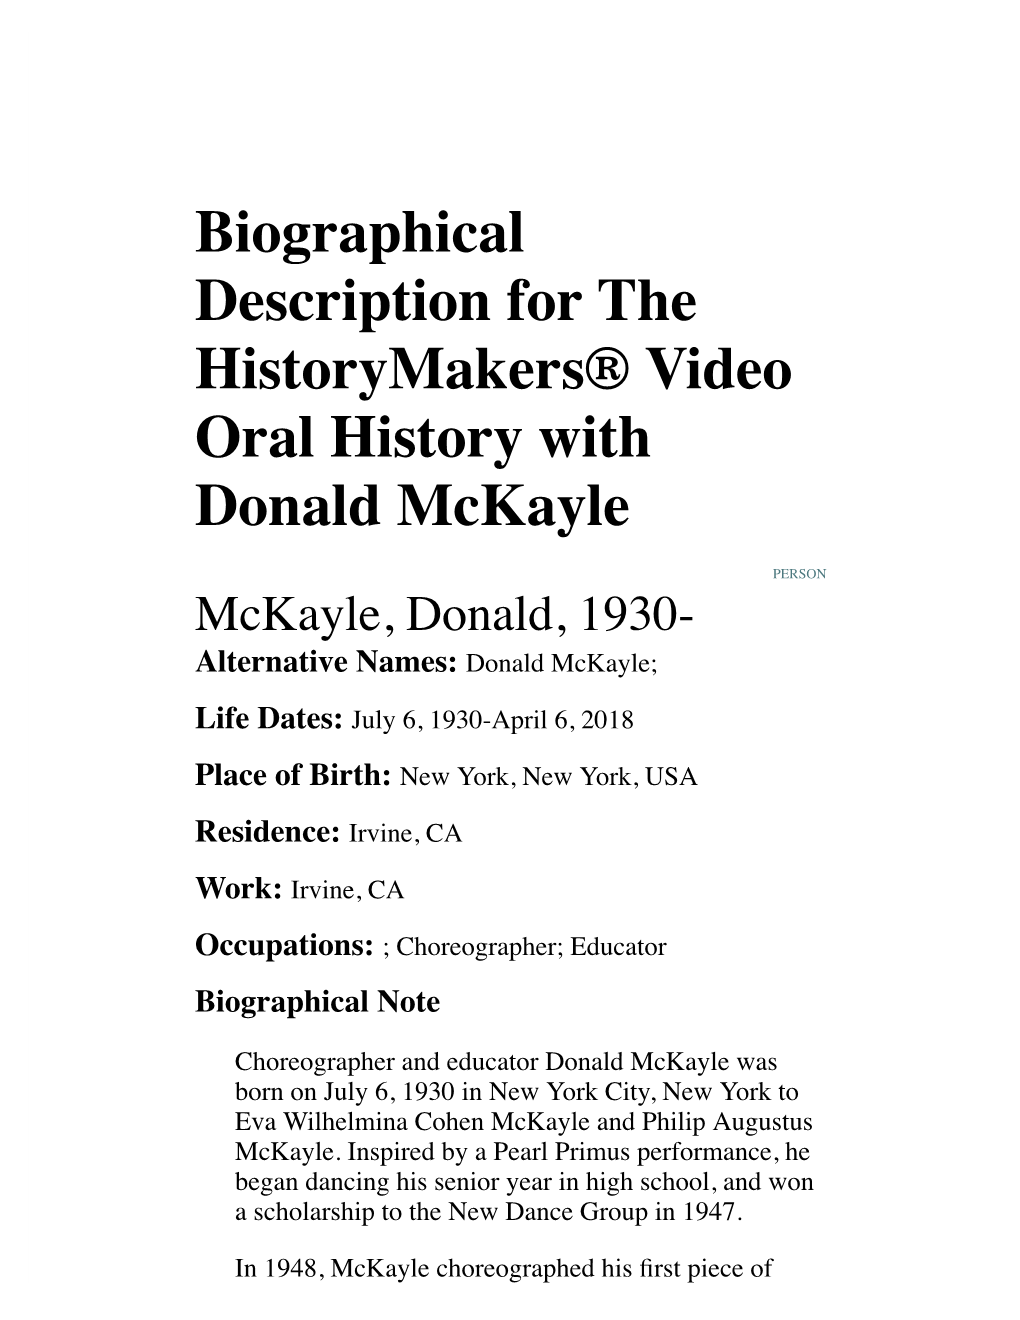 Biographical Description for the Historymakers® Video Oral History with Donald Mckayle